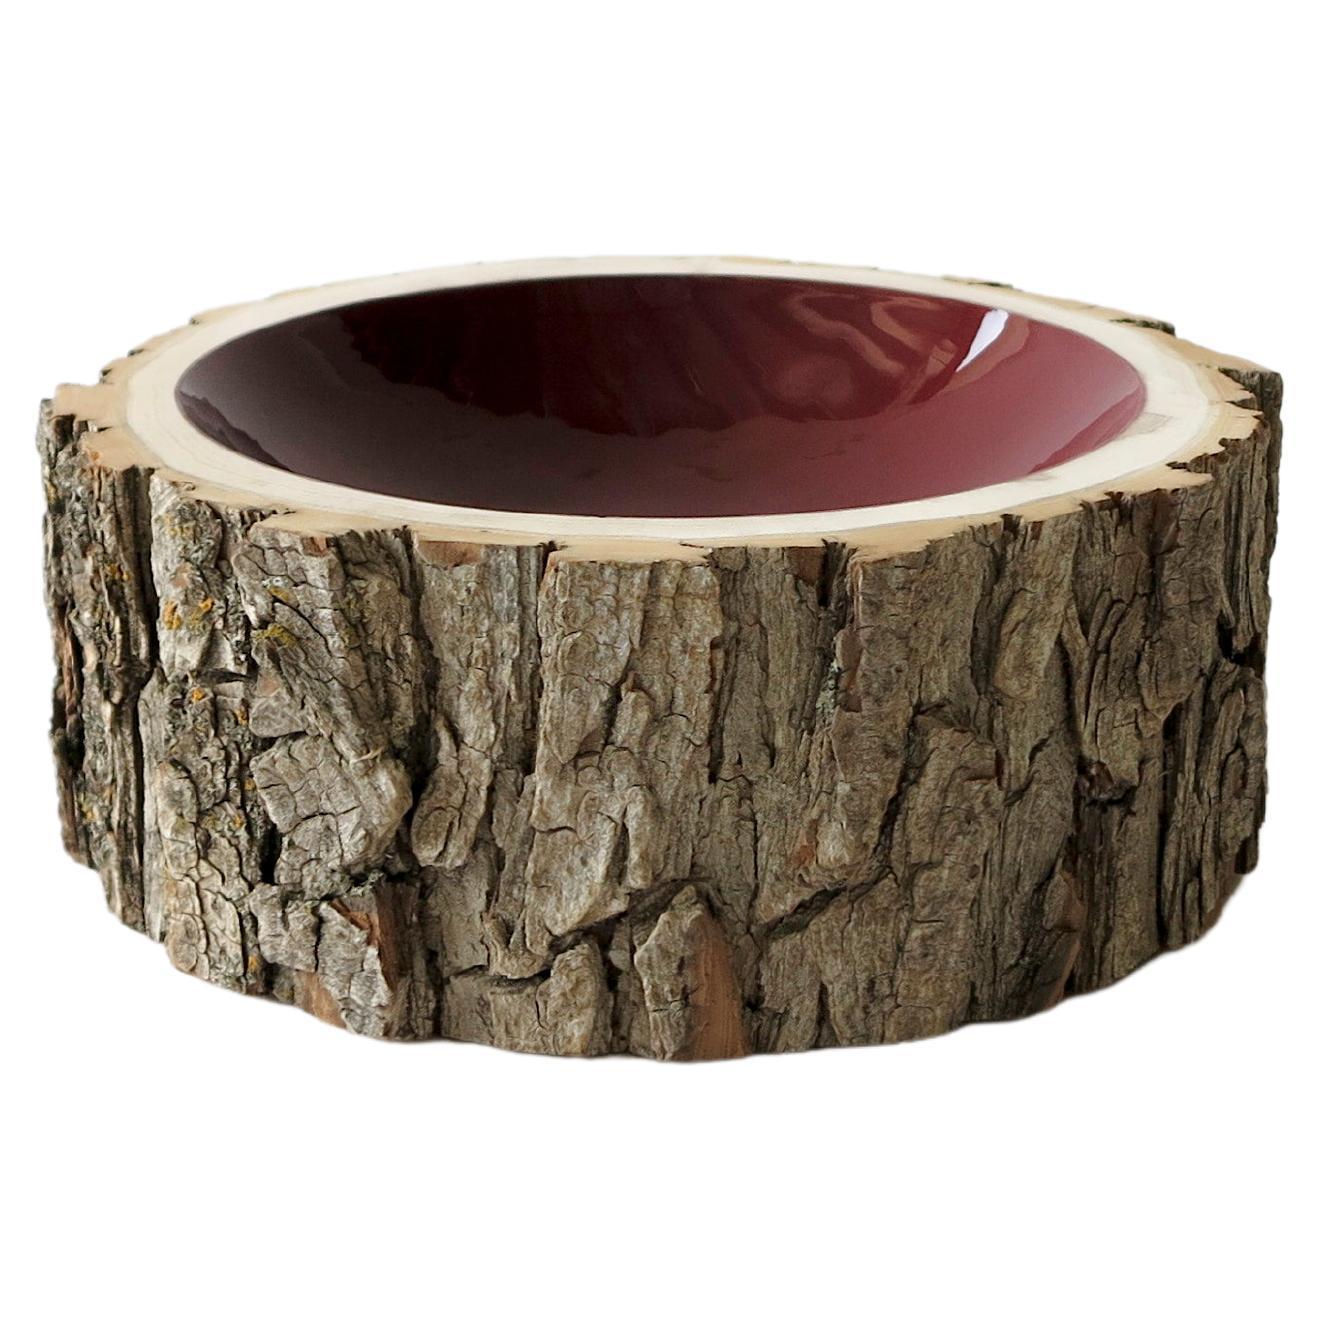 Merlot Size 9 Log Bowl by Loyal Loot Made to Order Made from Reclaimed Wood